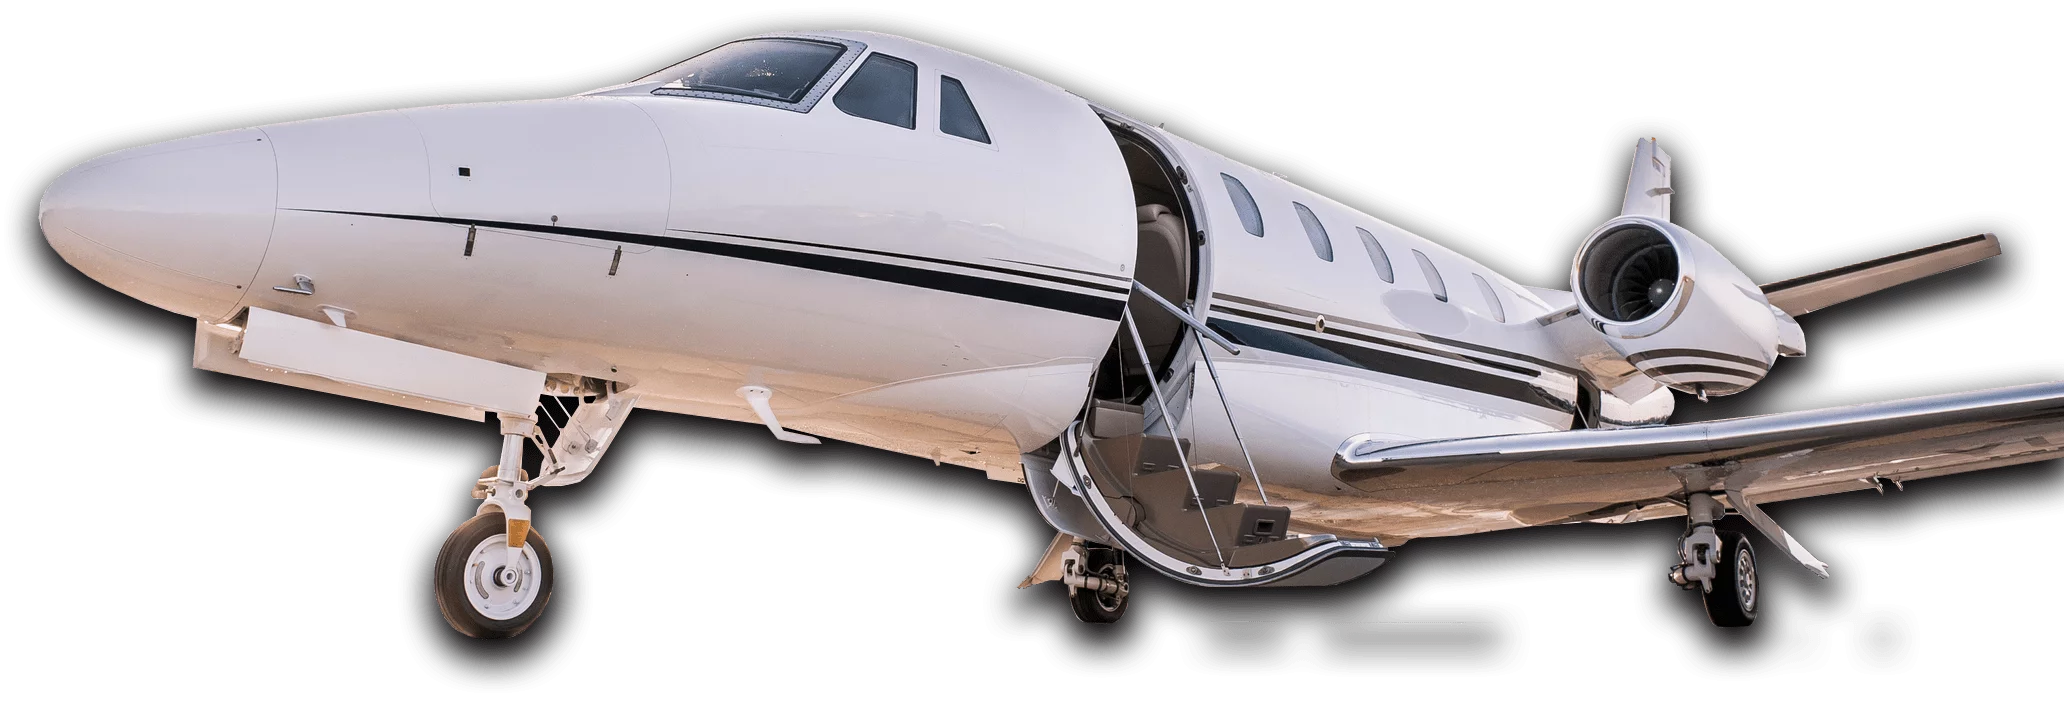 Private Jet Charter - Worldwide Private Jet Rental | The Early Airway